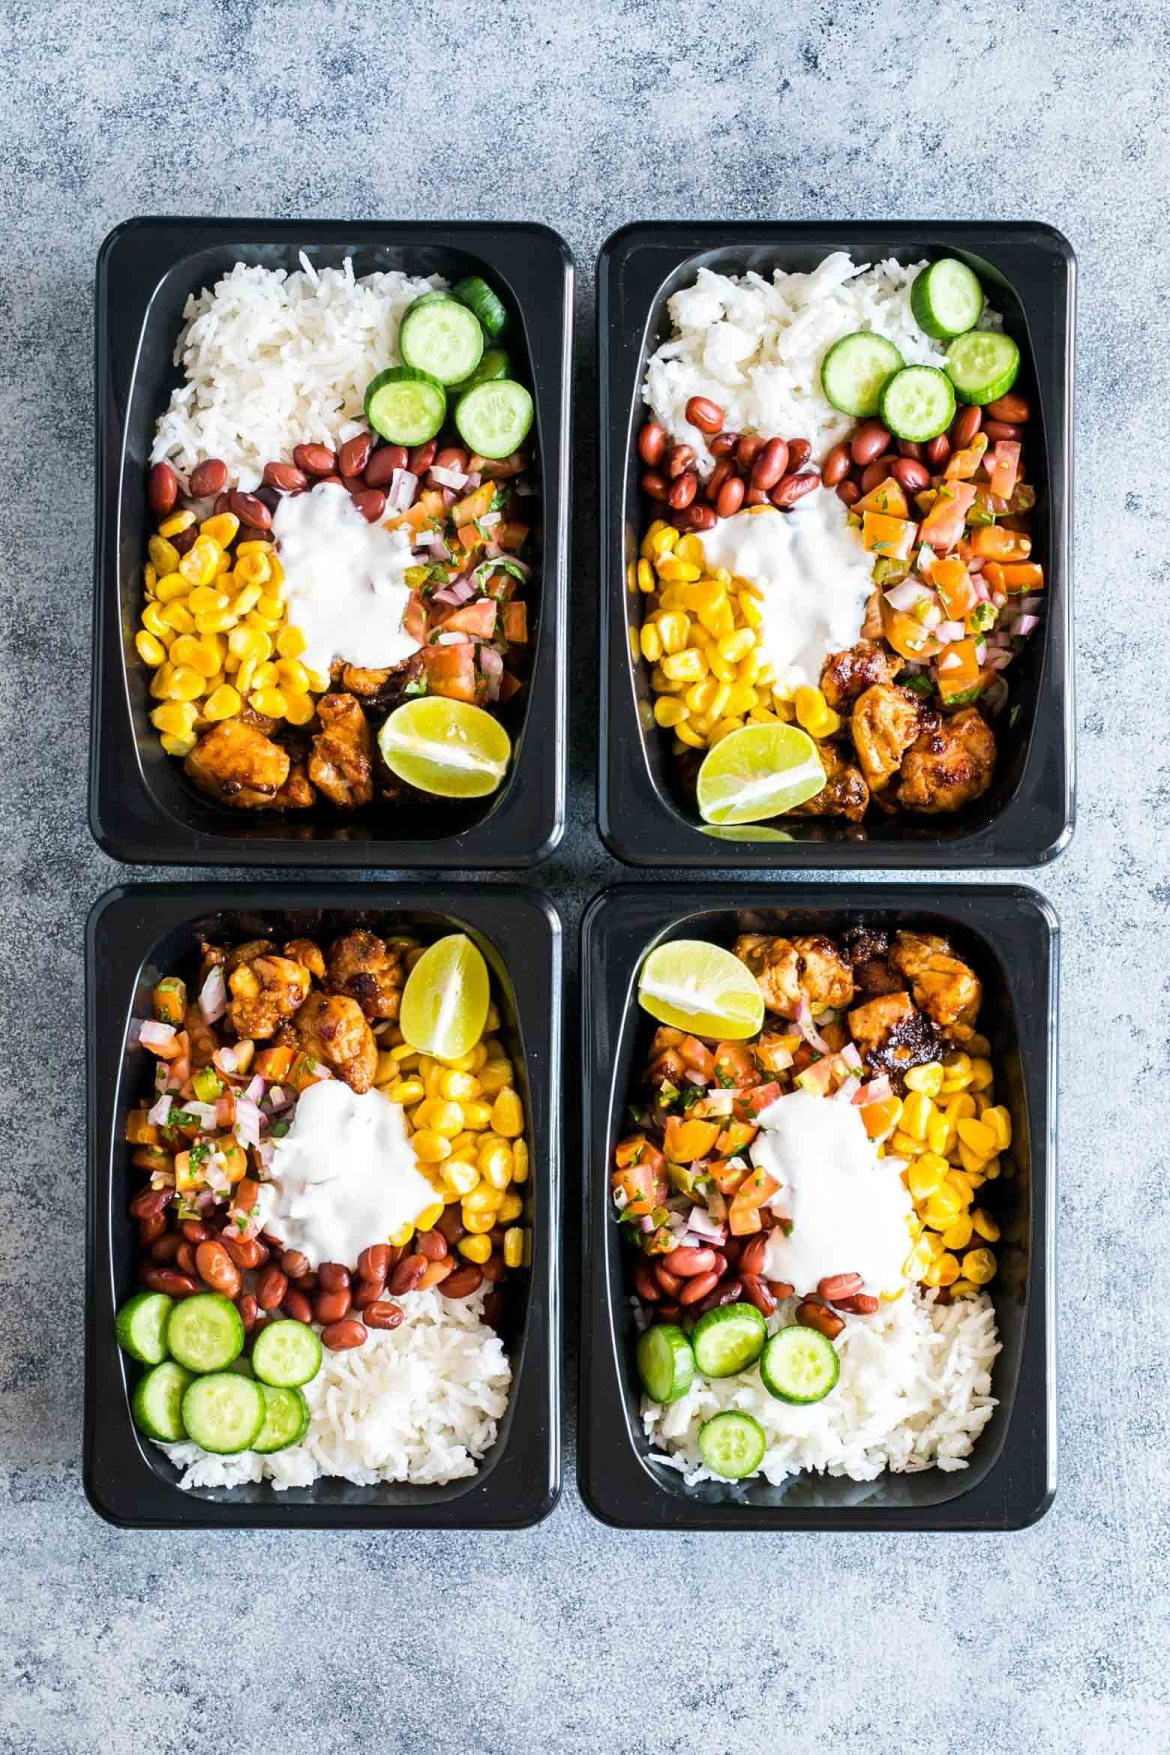 Dinners Ideas For The Week
 10 Meal Prep Ideas for the Week That Are Healthy & Delicious